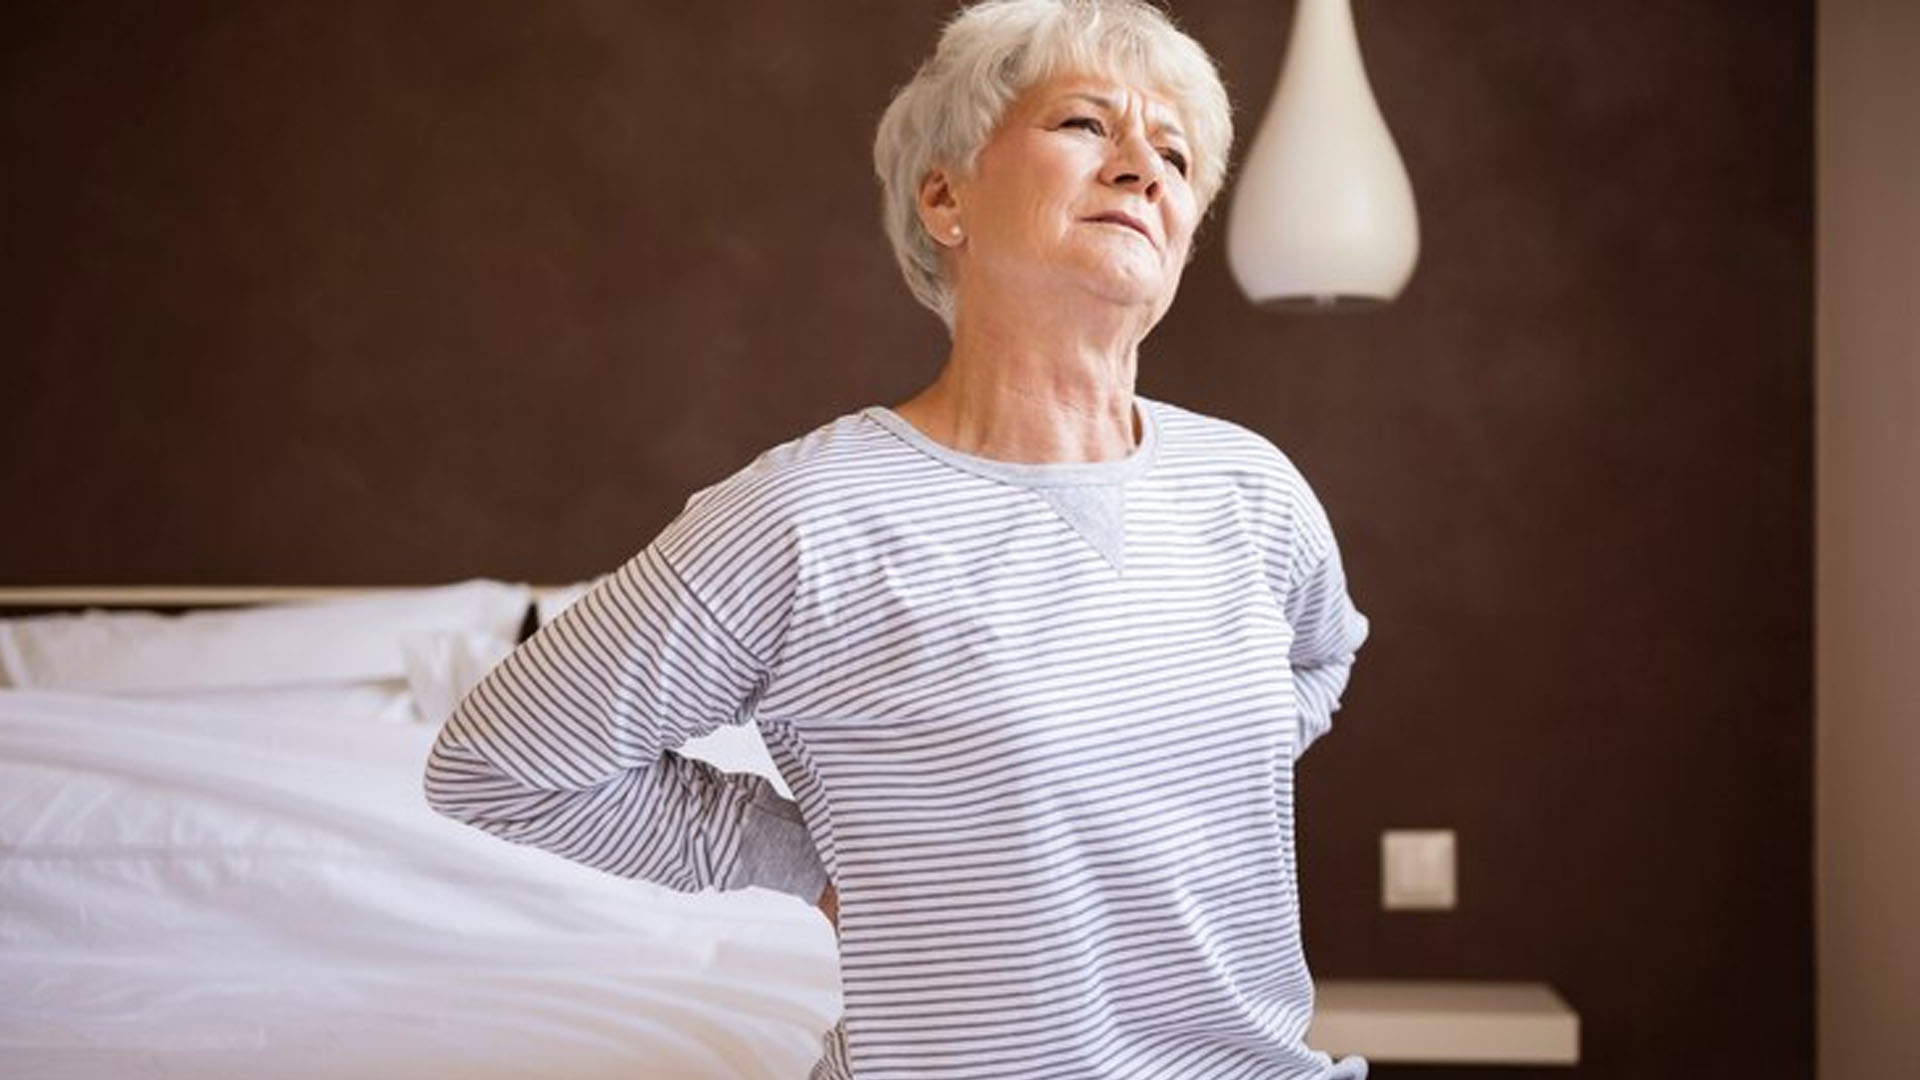 Is Back Pain a Symptom of Menopause?